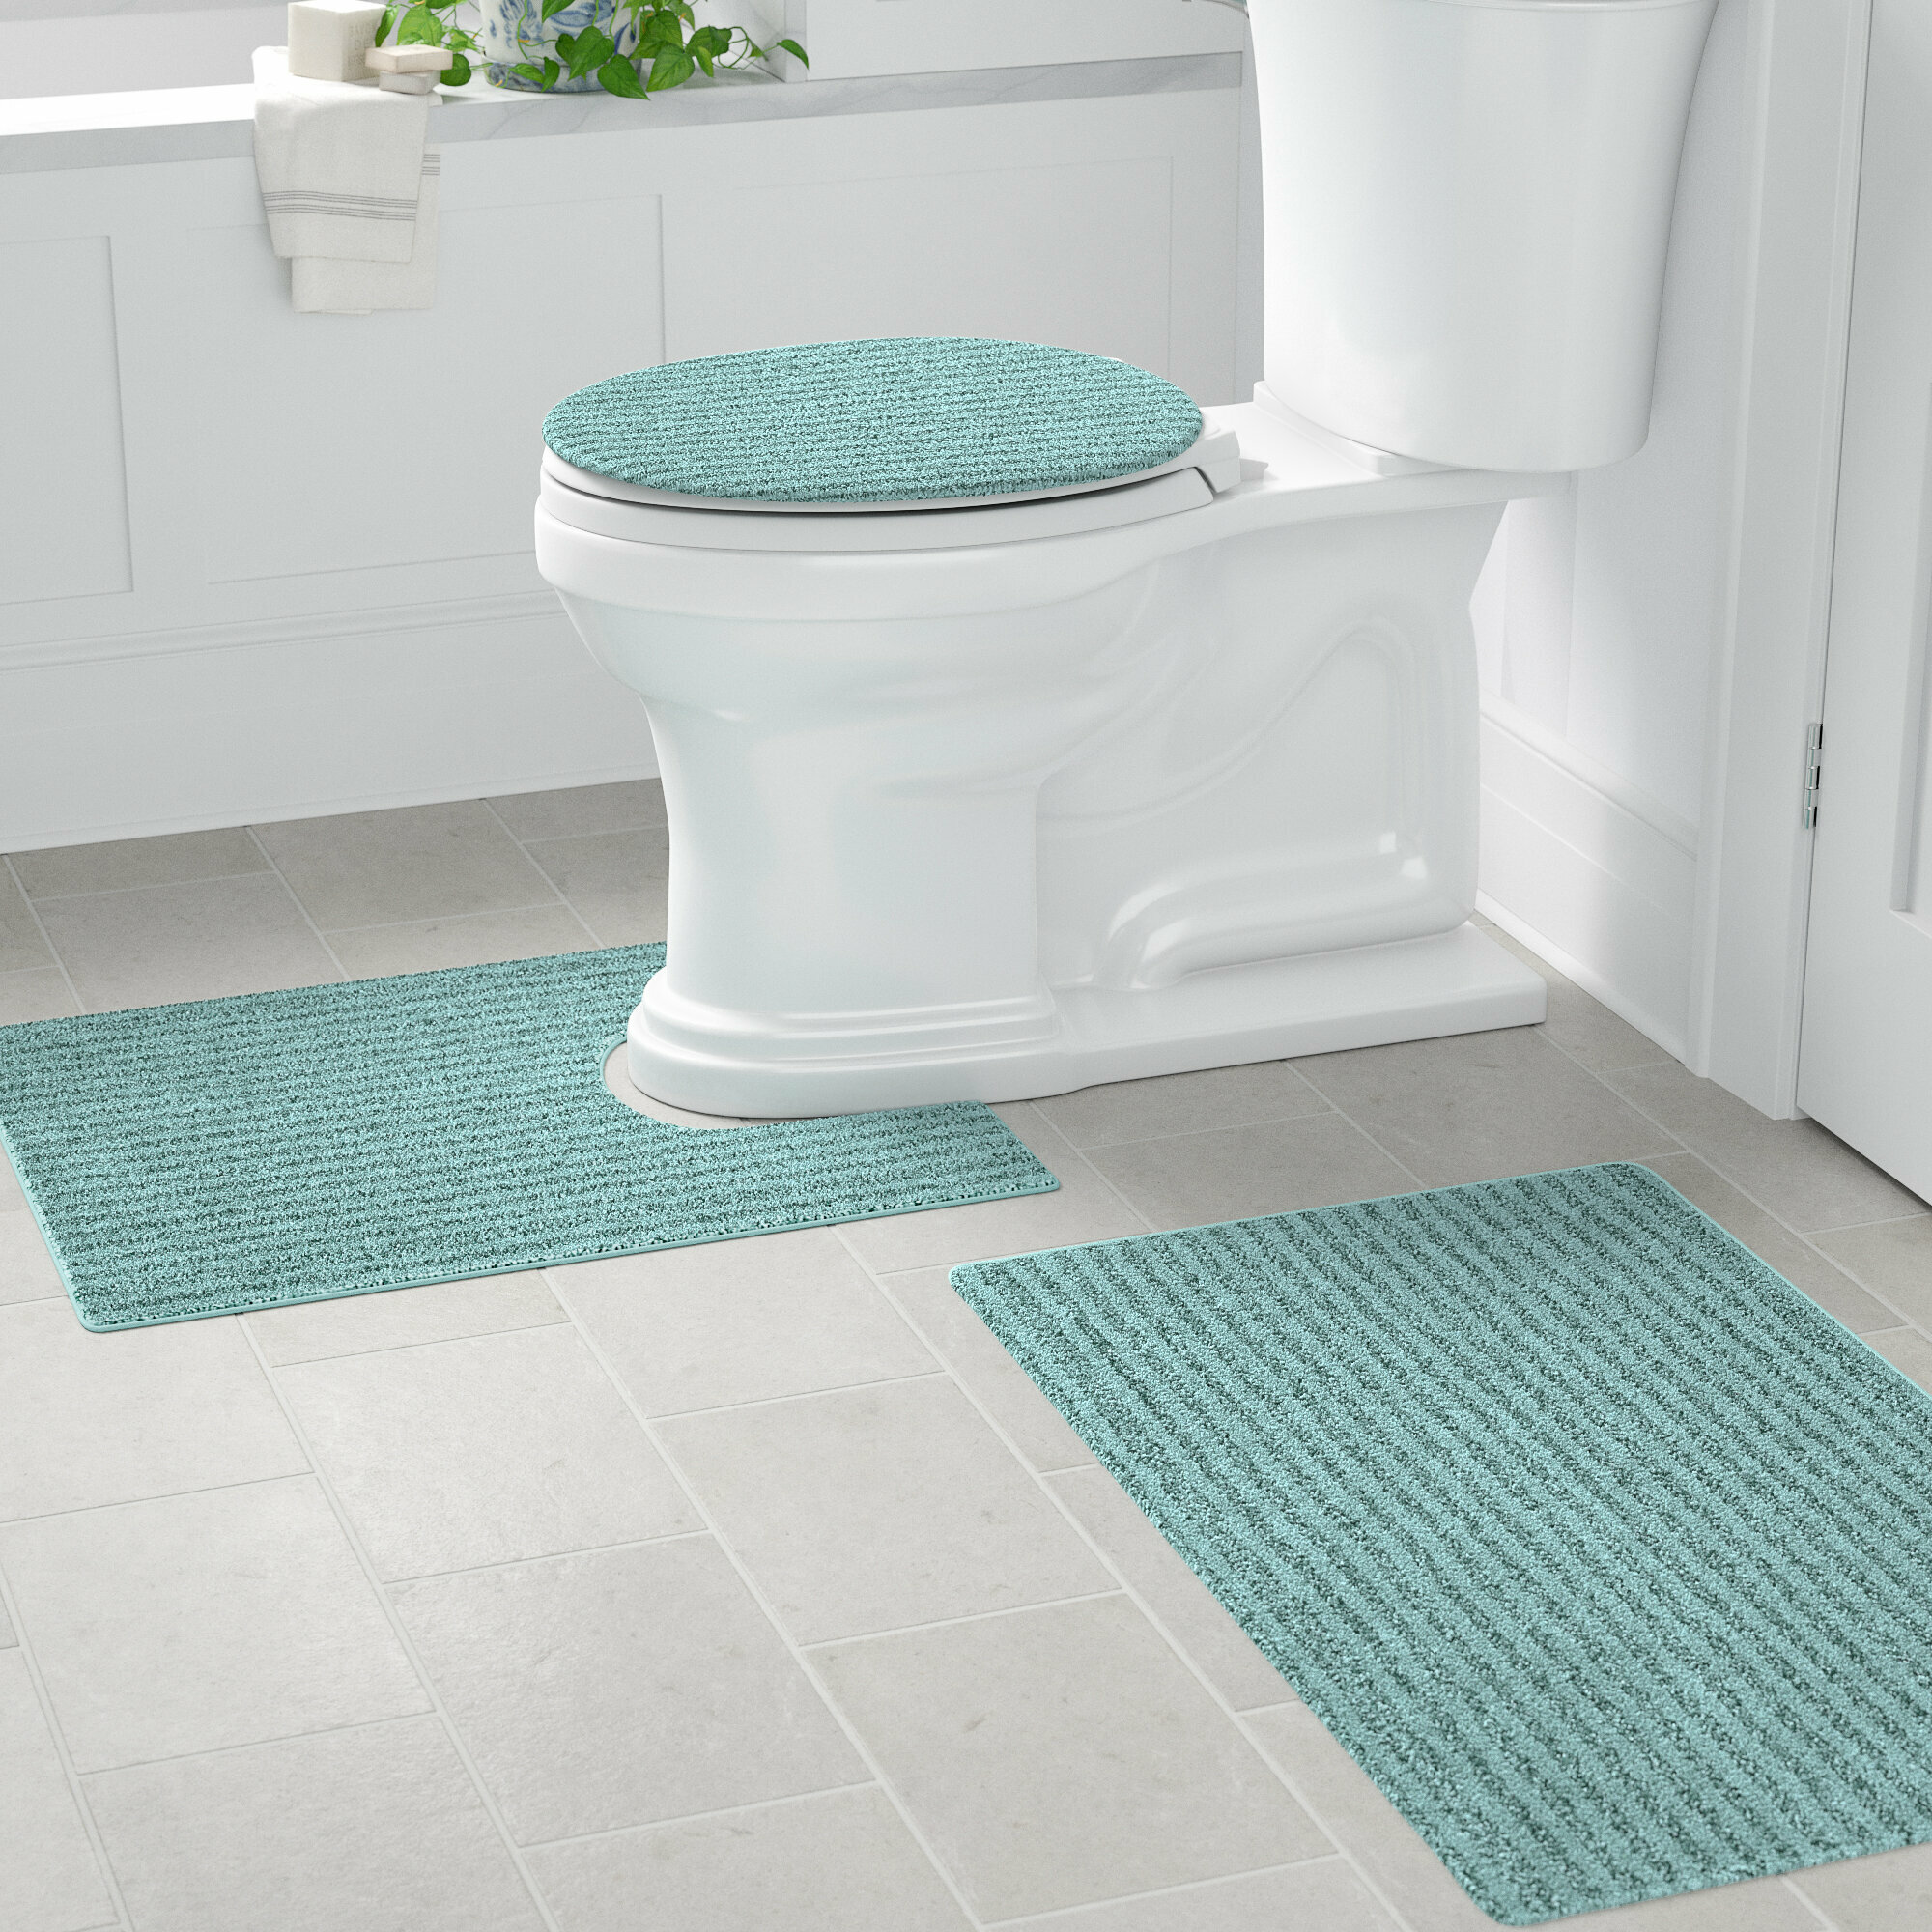 Latitude Run® Aighan 3 Piece Ultra Soft and Absorbent Memory Foam Bath Rug  Set with Non-Slip Backing & Reviews - Wayfair Canada